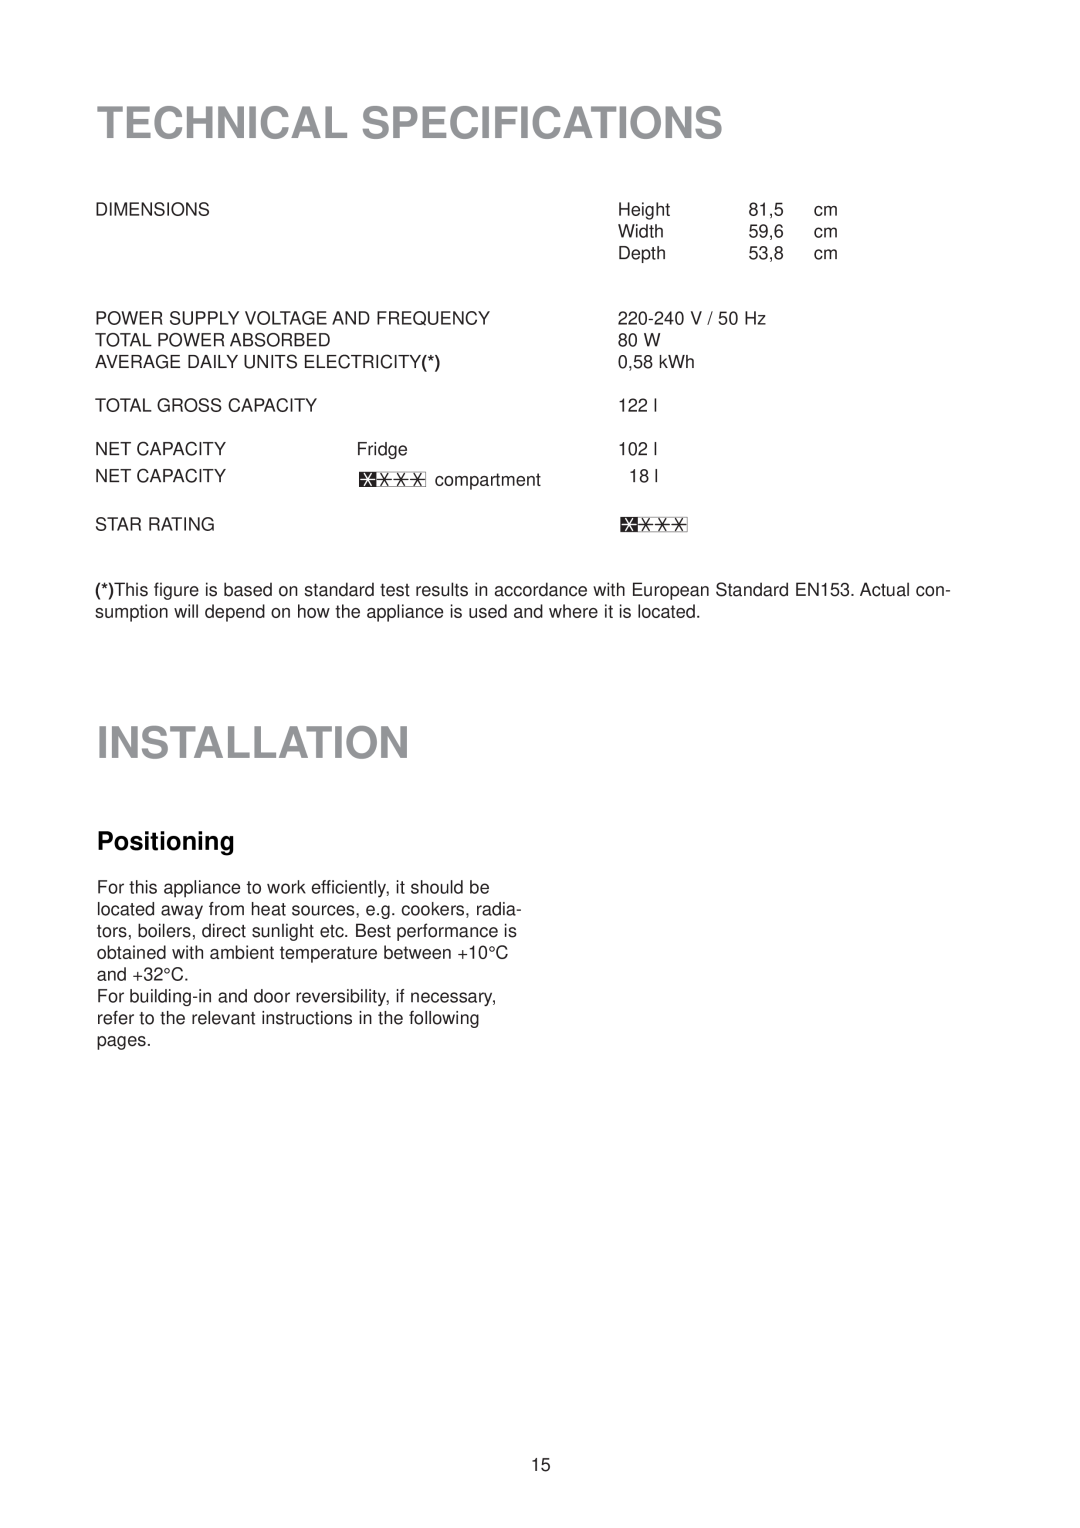 Zanussi ZU 9124 manual Technical Specifications, Installation, Positioning 